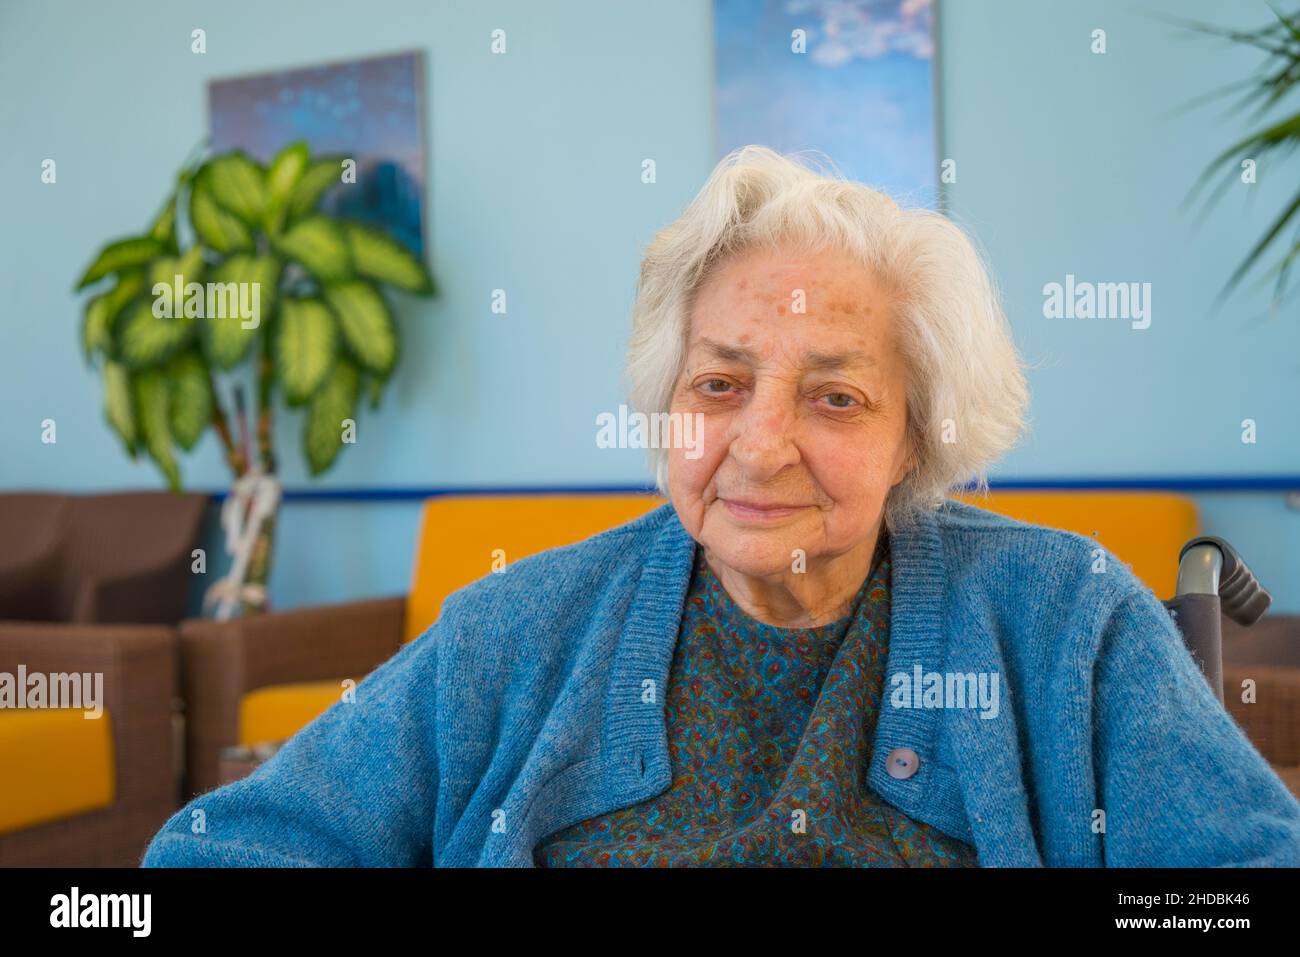 Portrait of old lady smiling and looking at the camera. Stock Photo